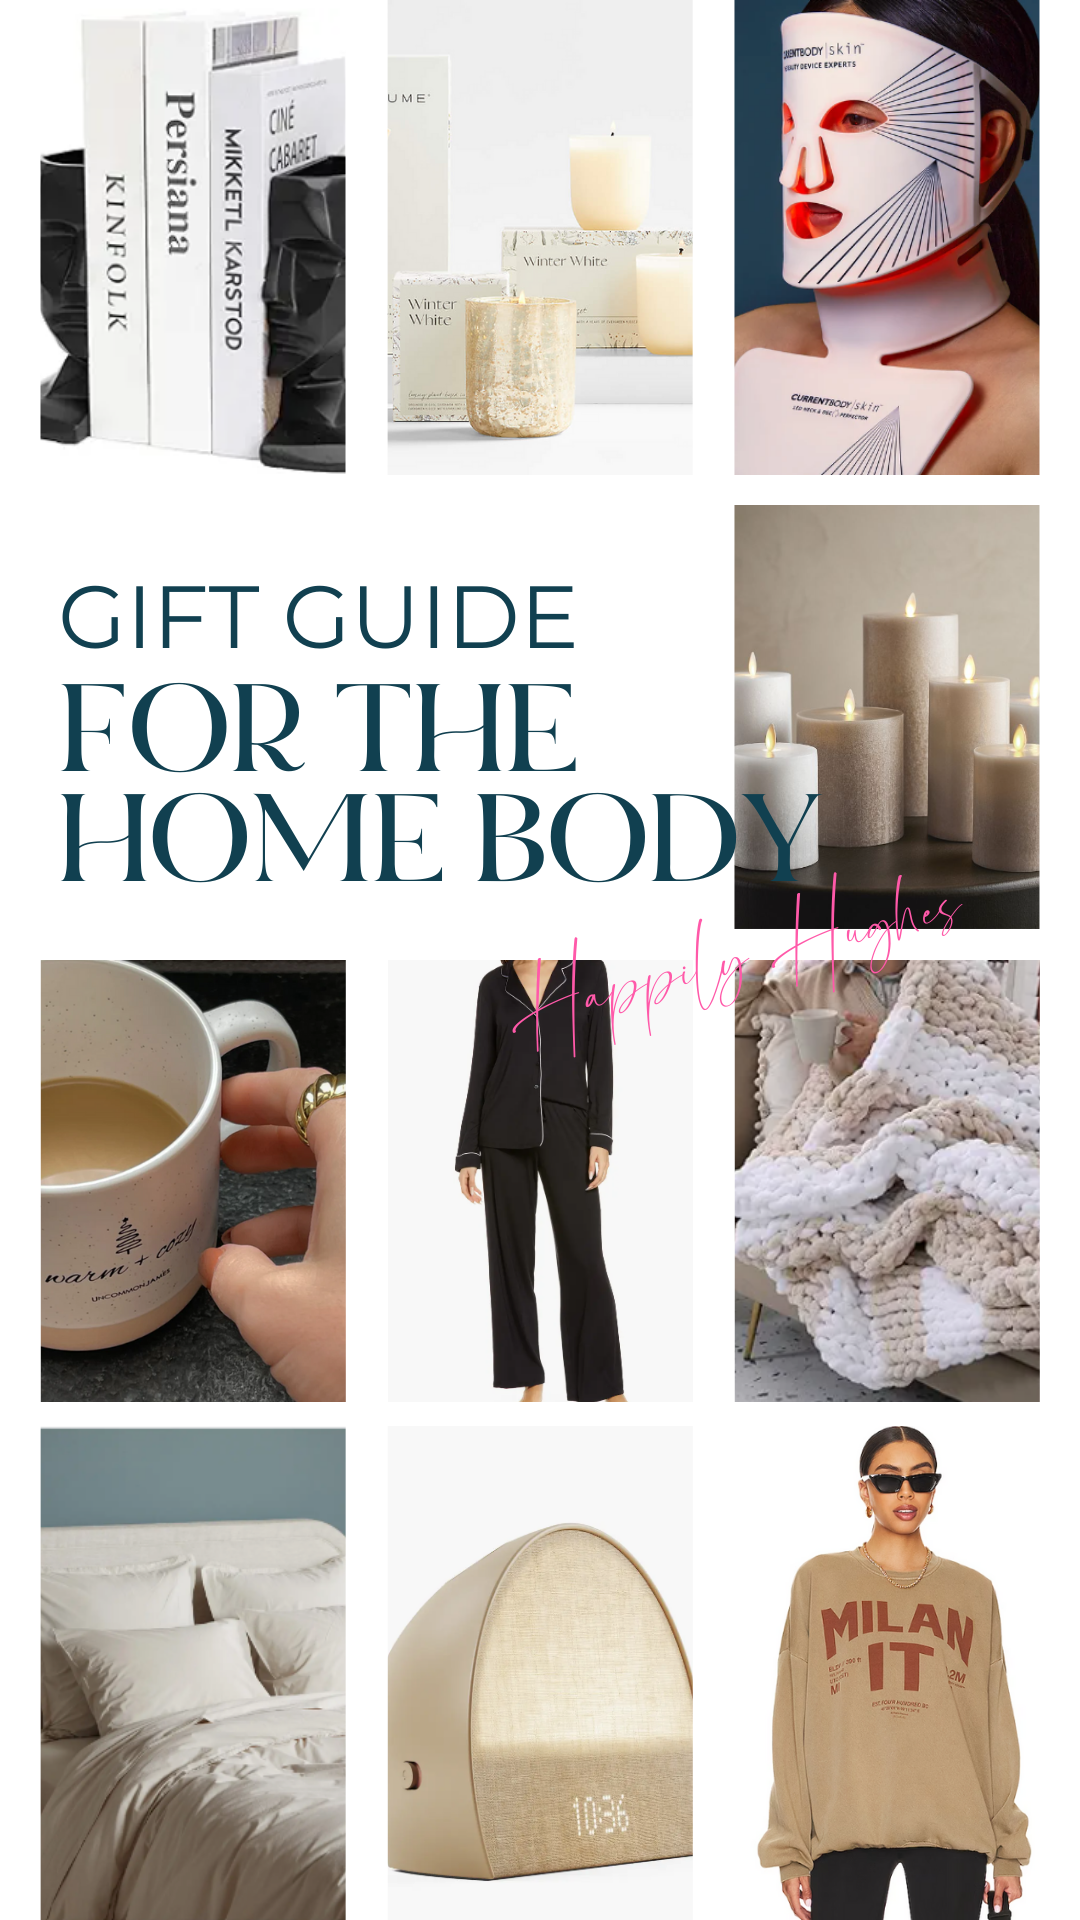 Gift Guide for the Home Body